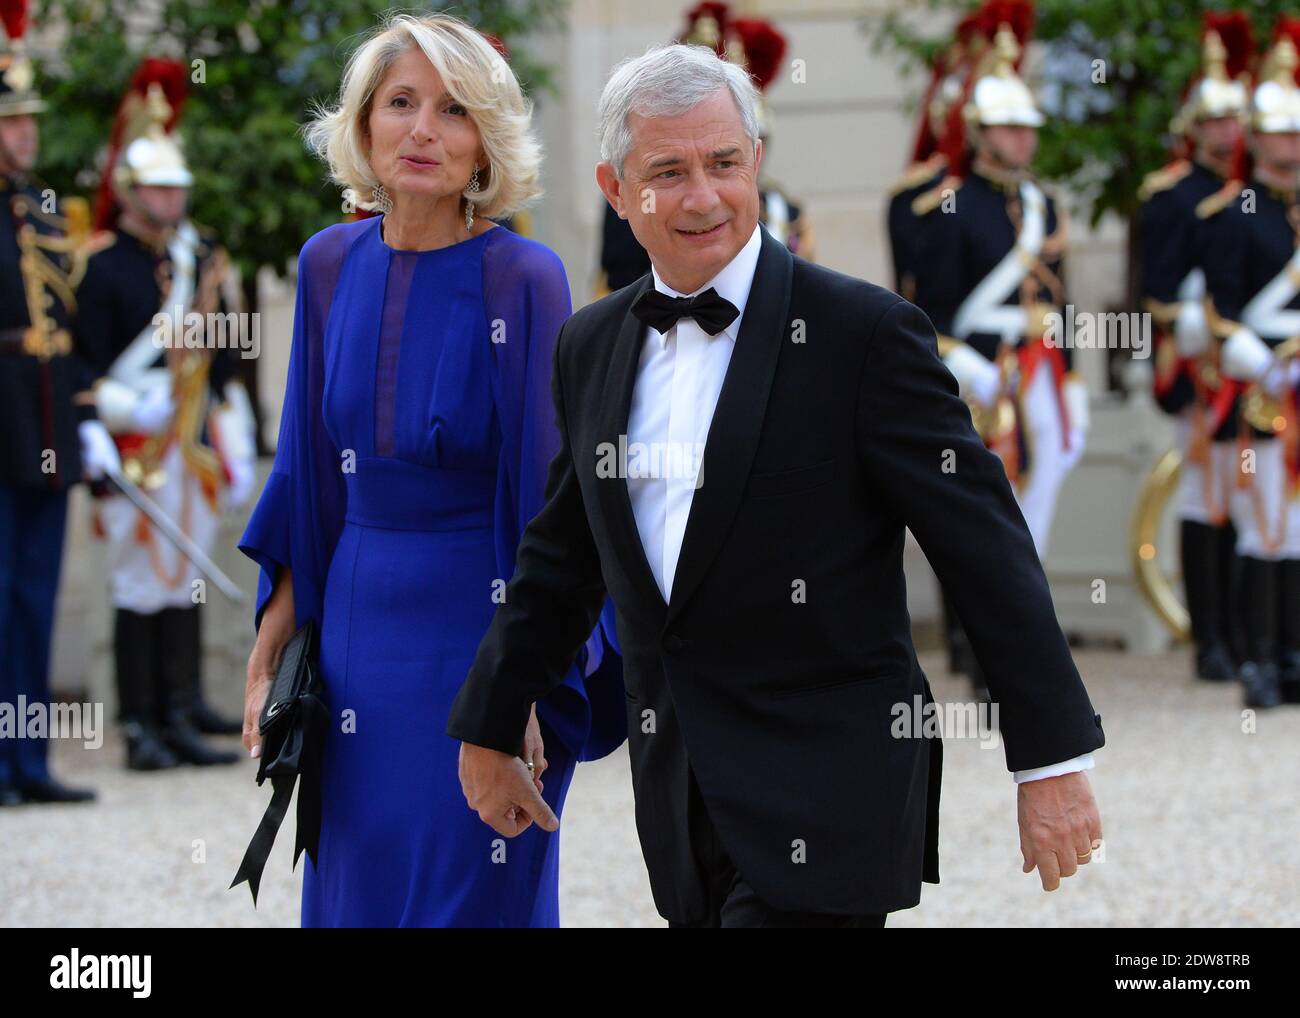 French President of the National Assembly Claude Bartolone and his wife Veronique Ragusa attend the State Banquet given in honour of HM The Queen Elizabeth II by French President Francois Hollande at the Elysee Palace, as part of the official ceremonies of the 70th Anniversary of the D Day, on June 6, 2014, in Paris, France. Photo by Christian Liewig/ABACAPRESS.COM Stock Photo